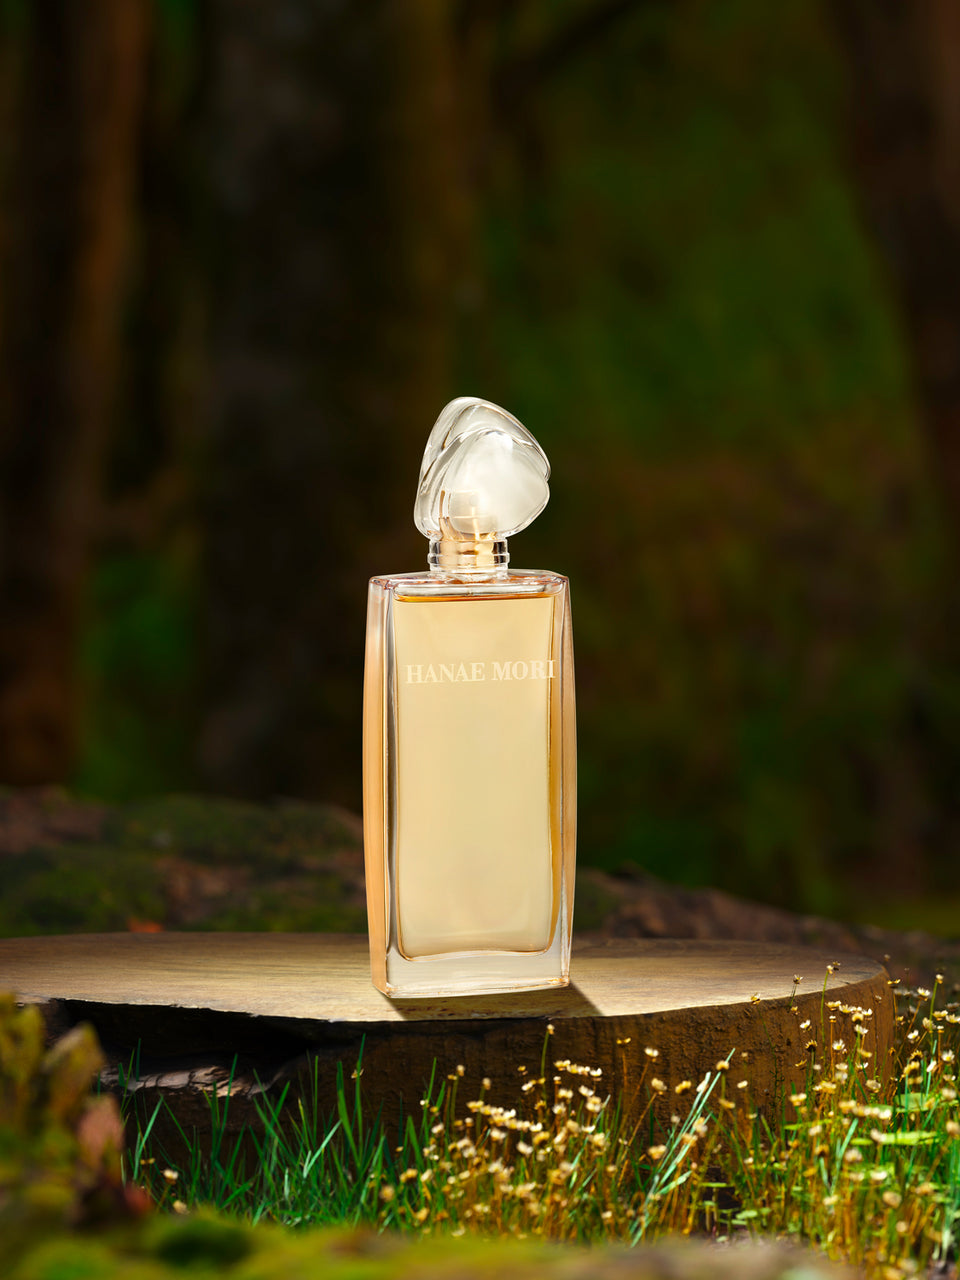 BUTTERLFY an Iconic Perfume